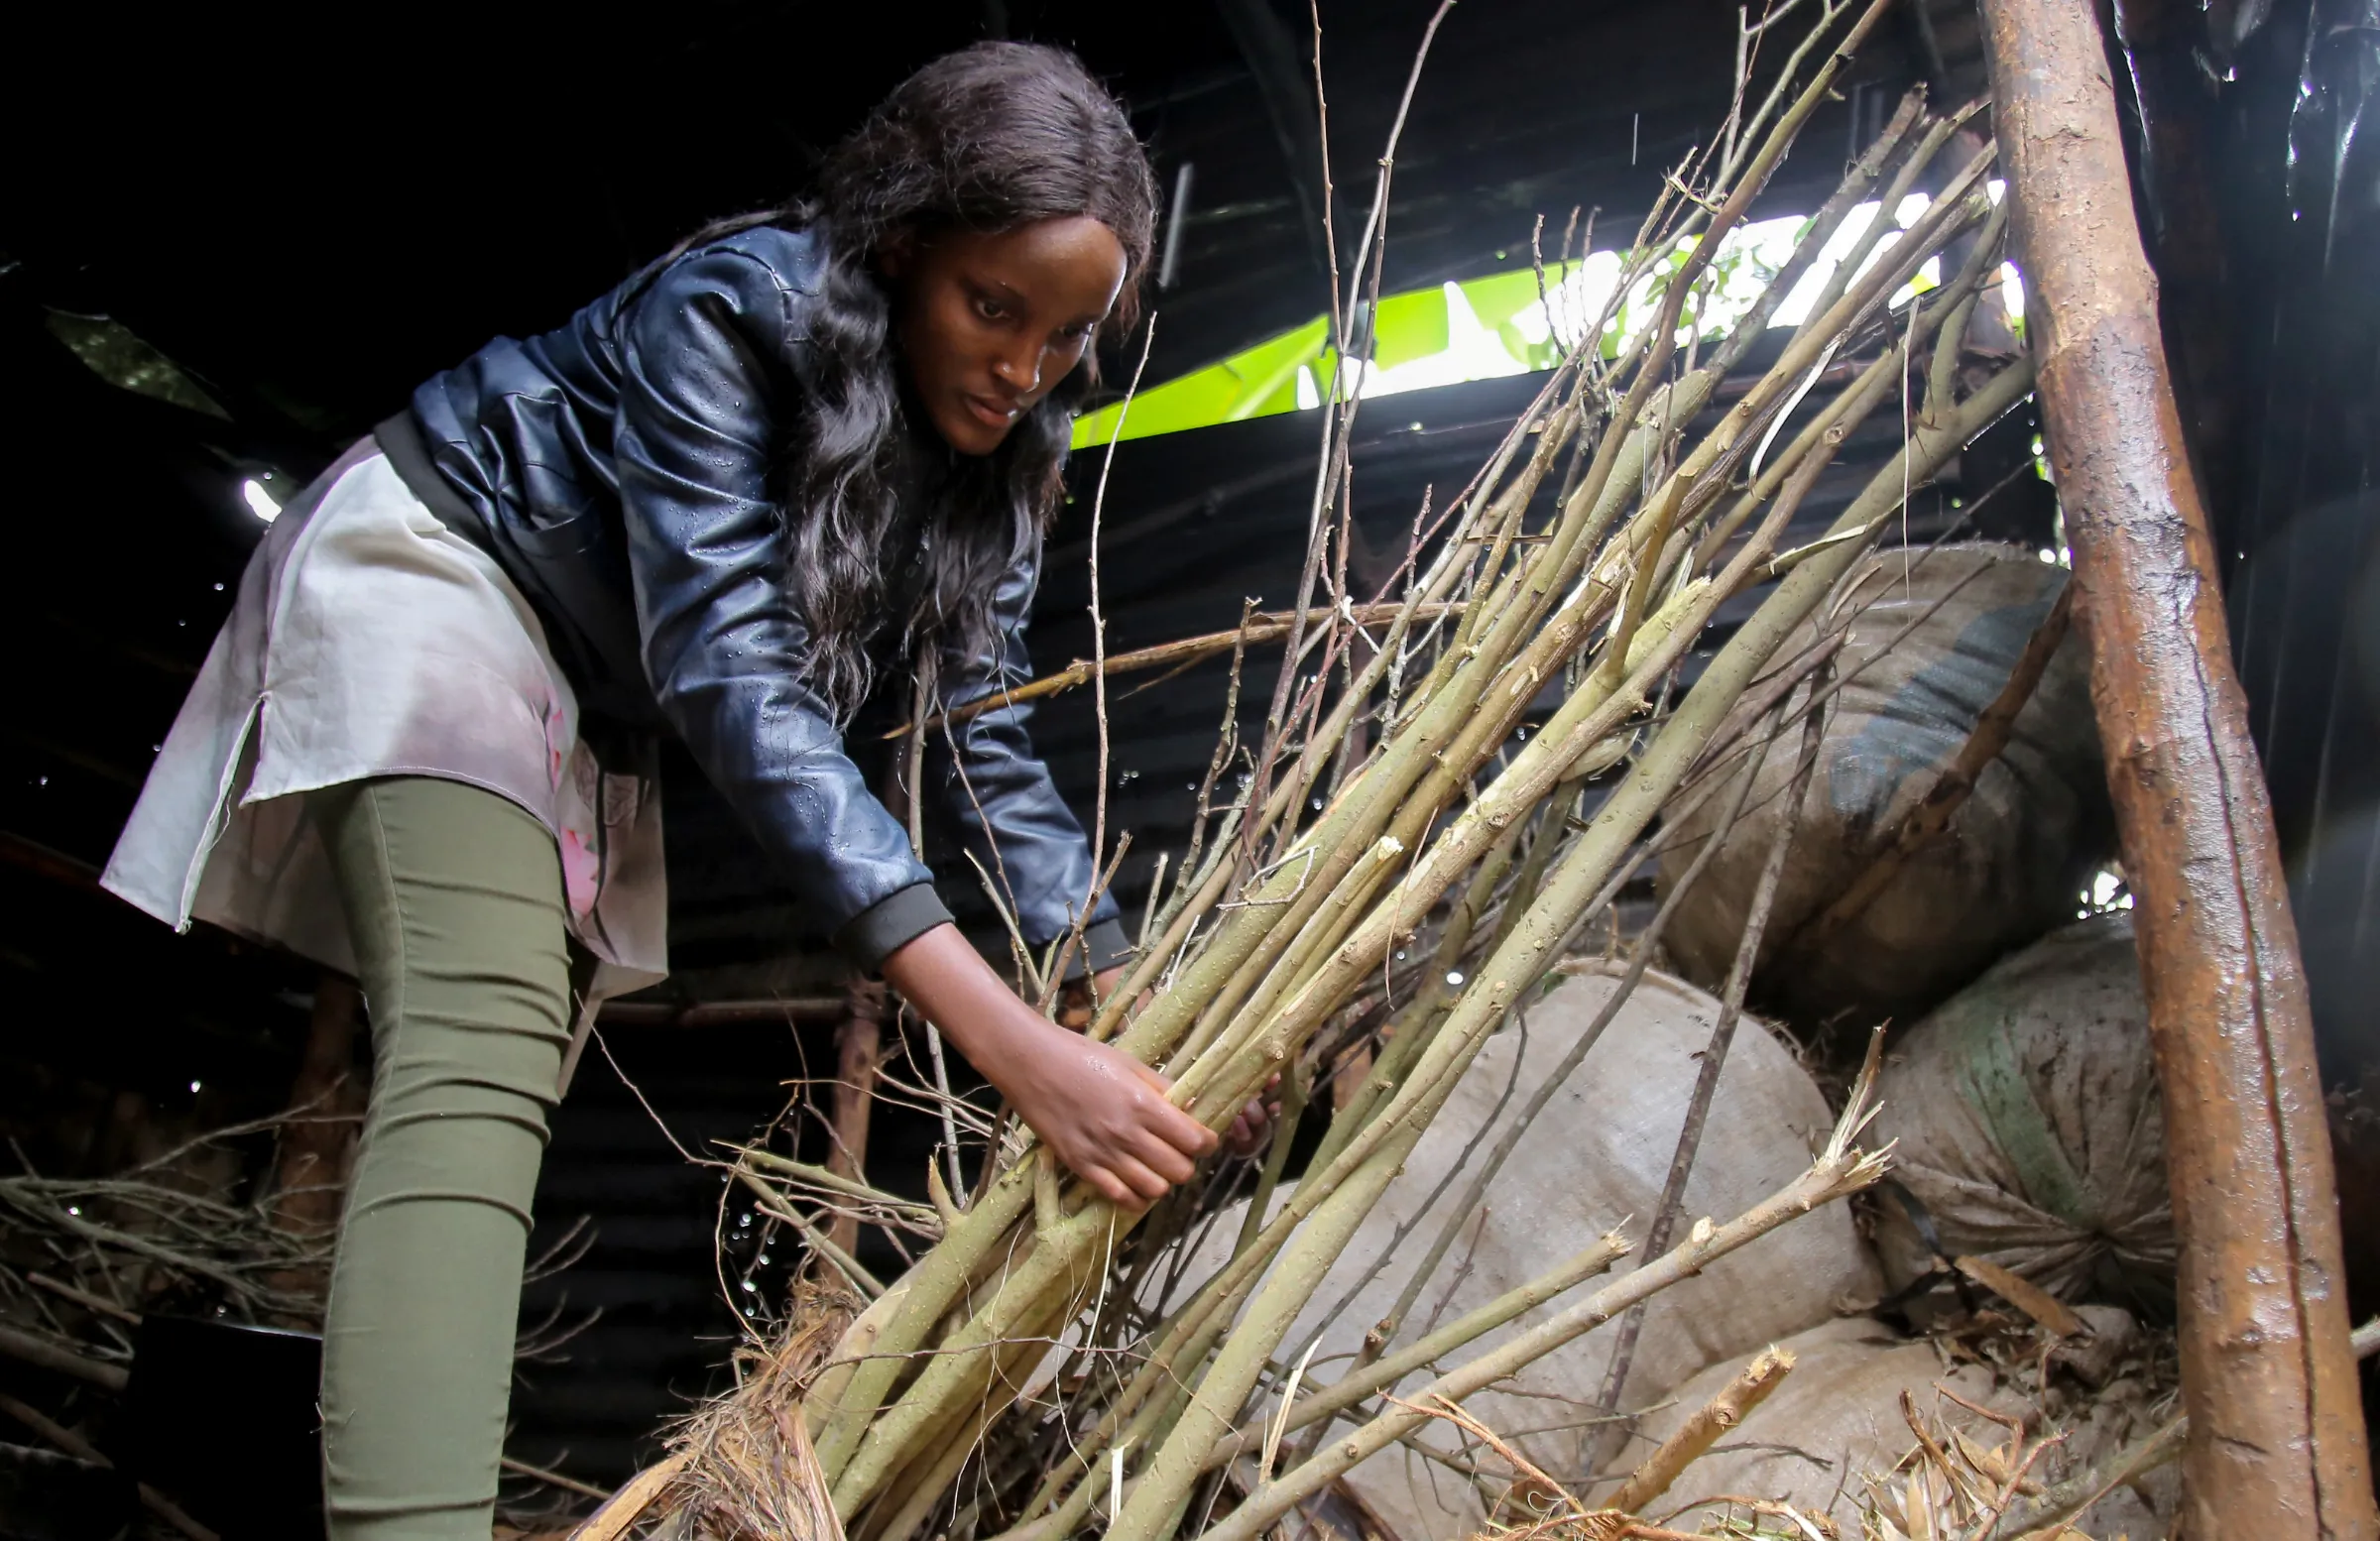 Ugandan climate change activist Vanessa Nakate, looks at the firewood cut from the forests as she visits the kitchen of Luwunga Primary school in Buwama, Mpigi district, Uganda, September 22, 2020. Picture taken September 22, 2020. REUTERS/Abubaker Lubowa